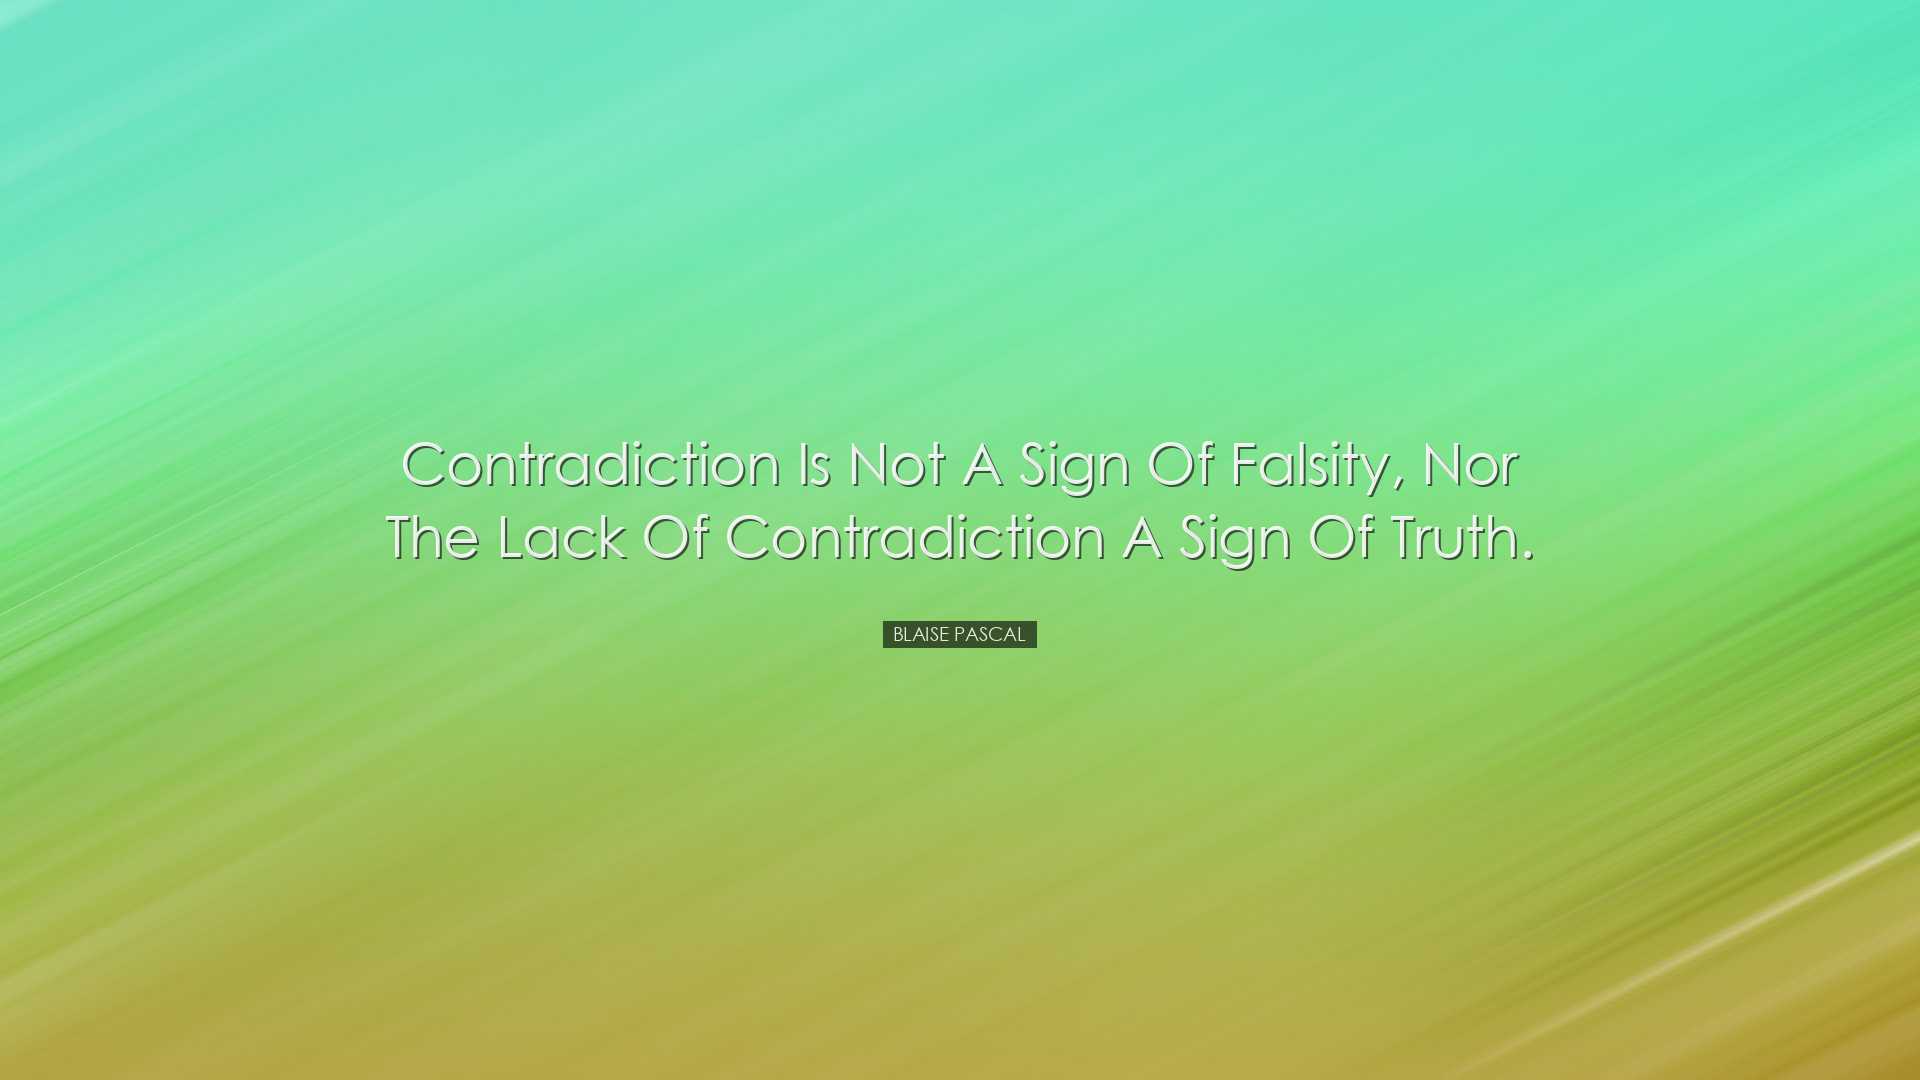 Contradiction is not a sign of falsity, nor the lack of contradict